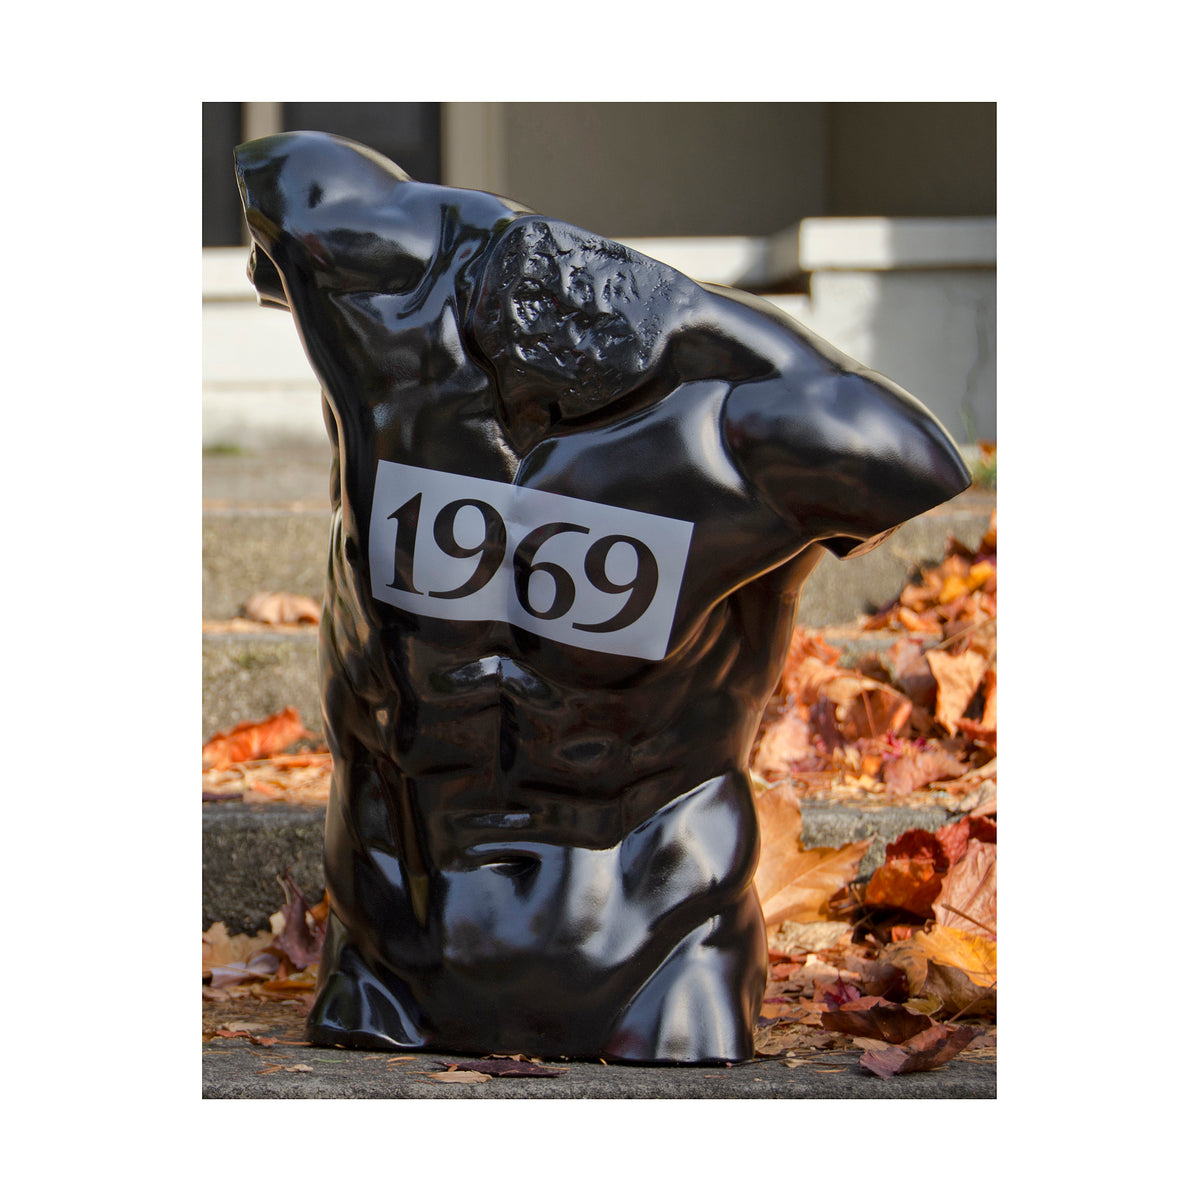 Simply stunning torso sculpture - high glossy black -1969 emblazoned across chest - sitting on concrete steps surrounded by colorful fall leaves